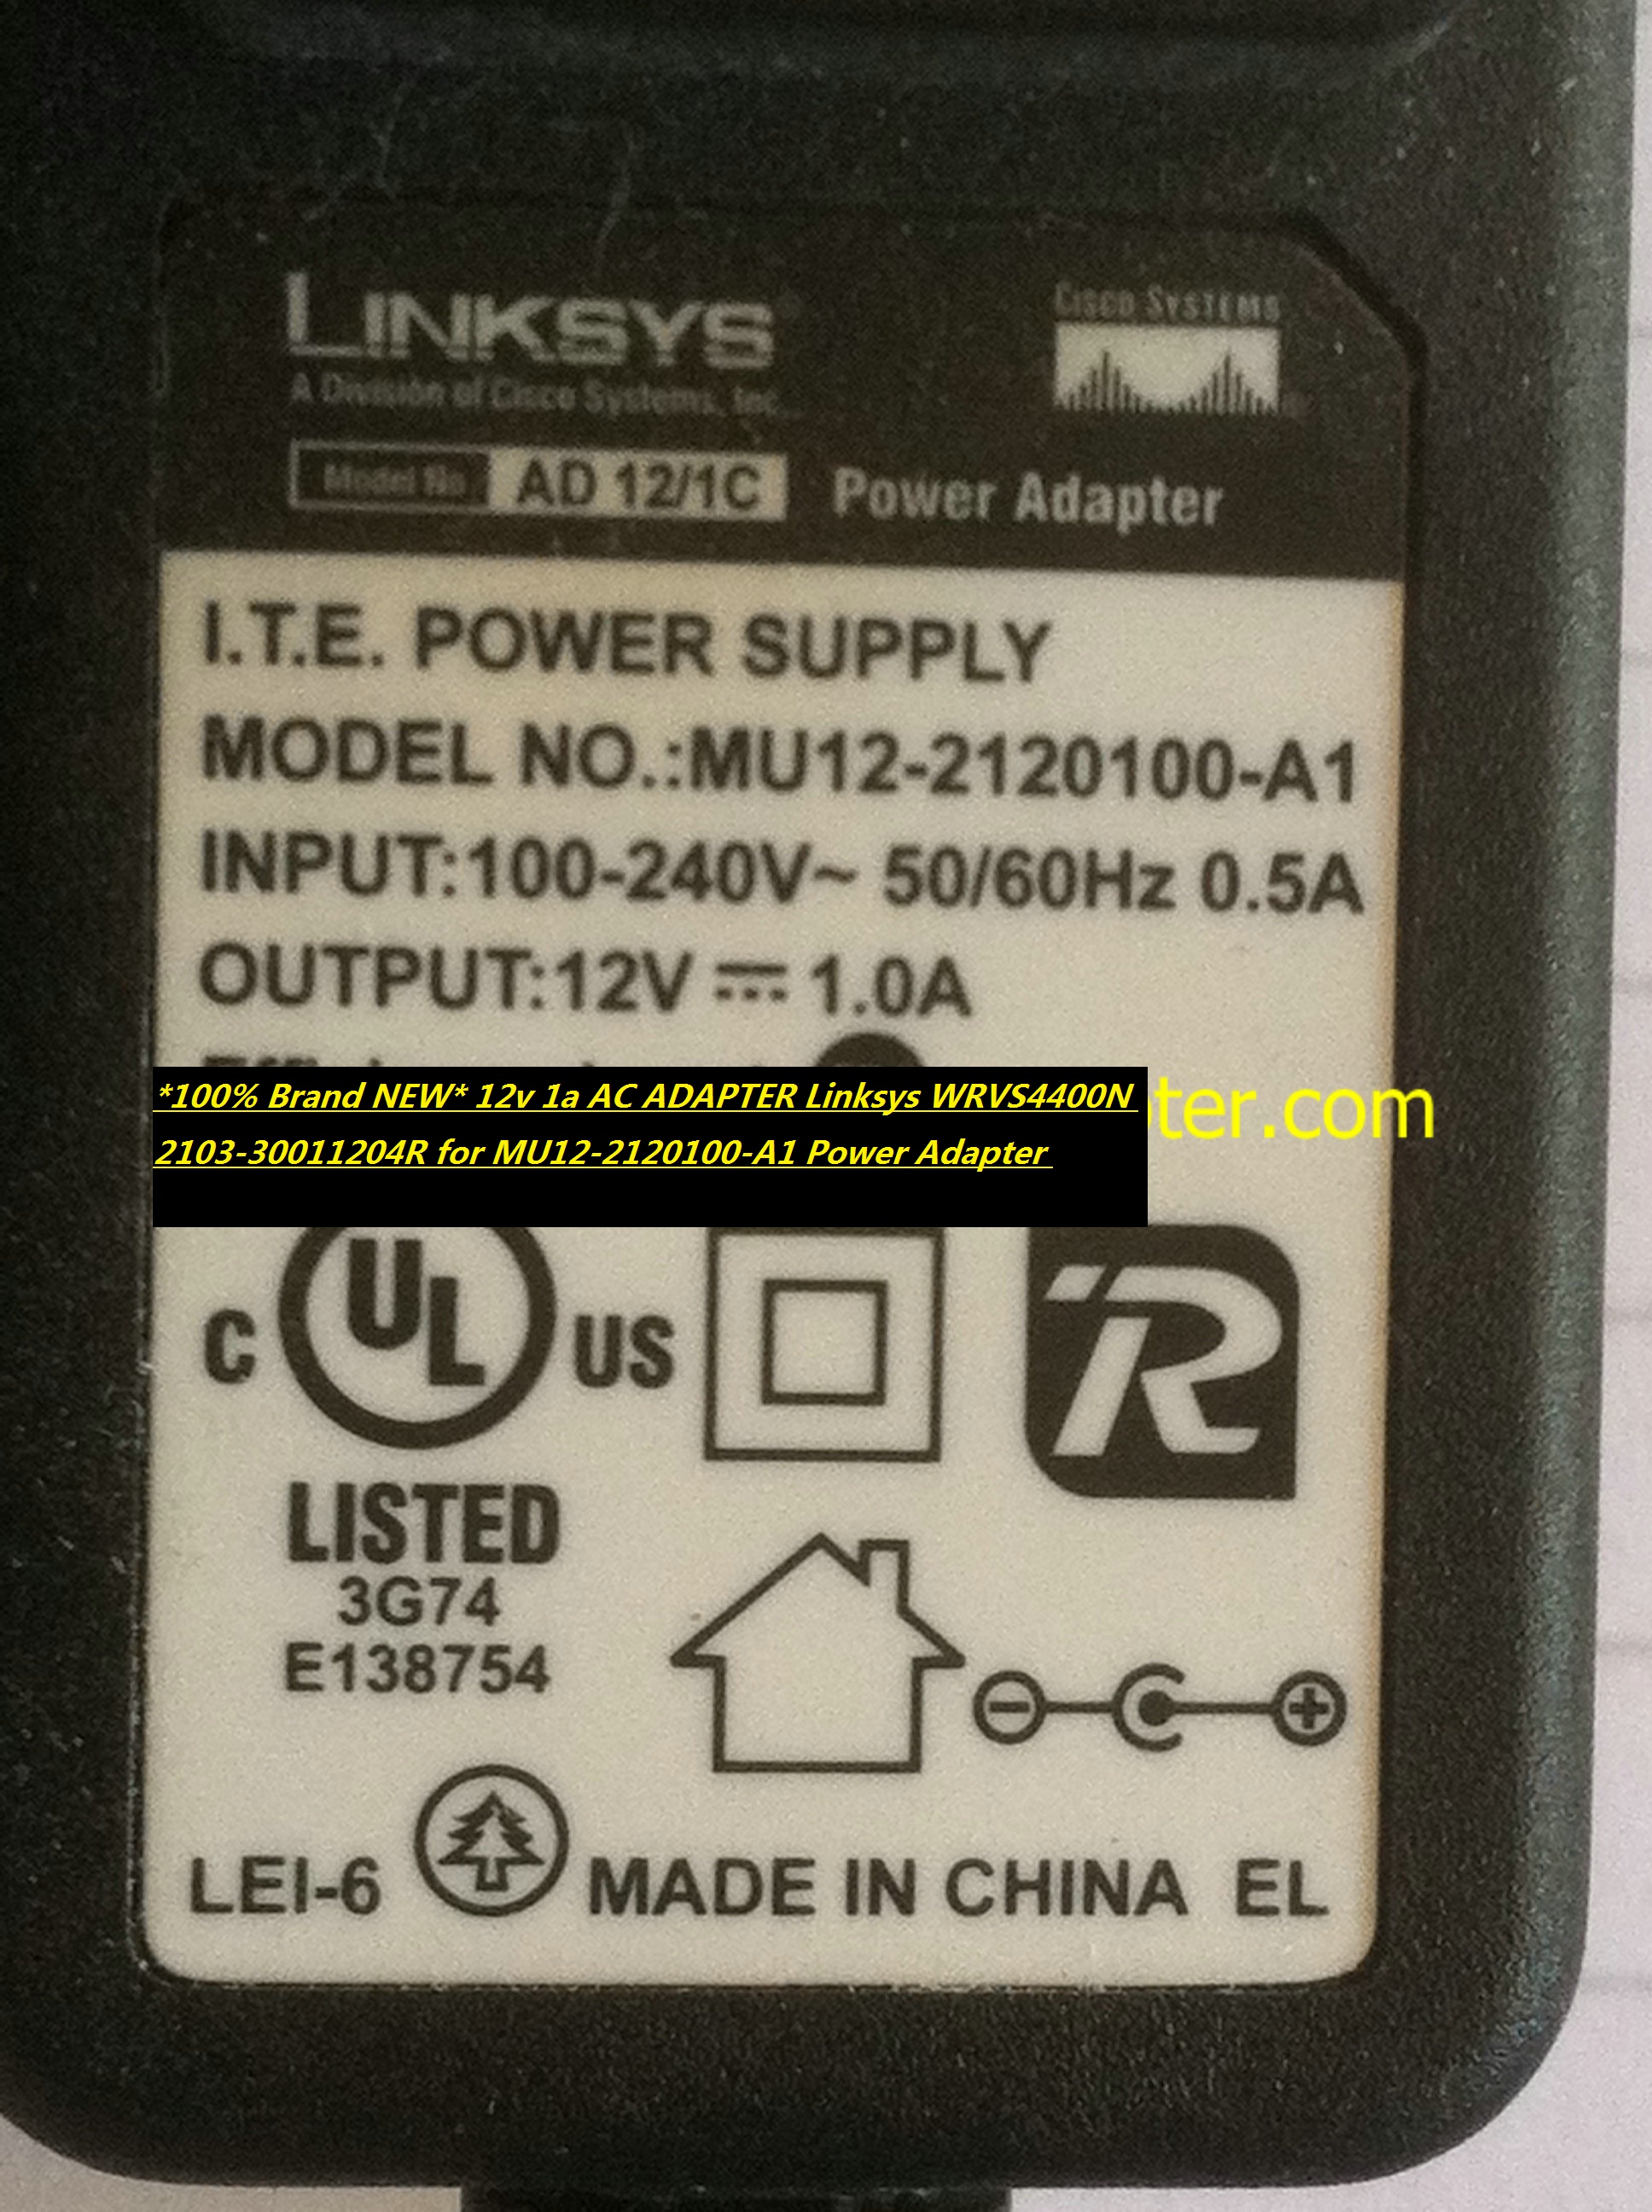 *100% Brand NEW* 12v 1a AC ADAPTER Linksys WRVS4400N 2103-30011204R for MU12-2120100-A1 Power Adapte - Click Image to Close